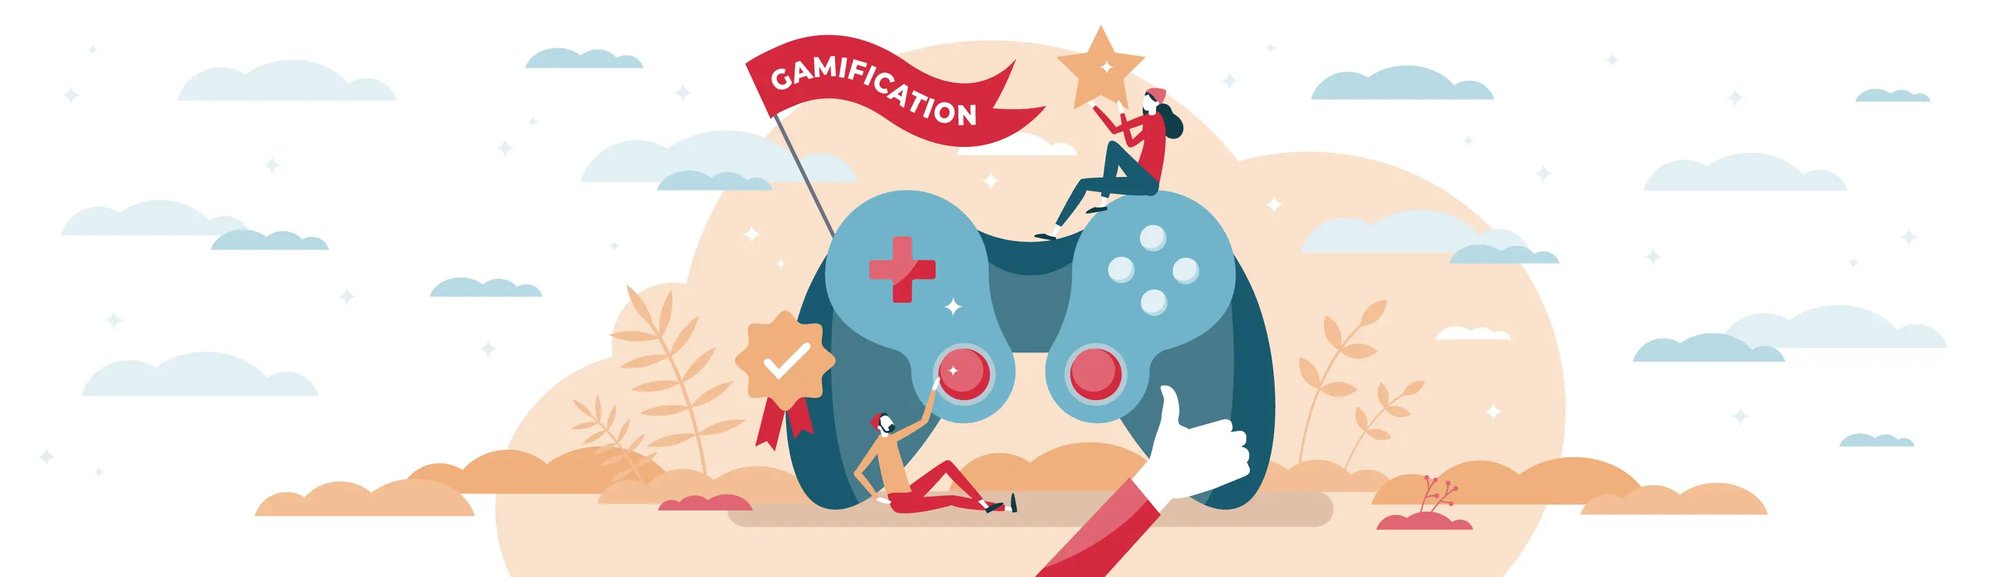 W4_Header_Image_Gamification_3061x883px